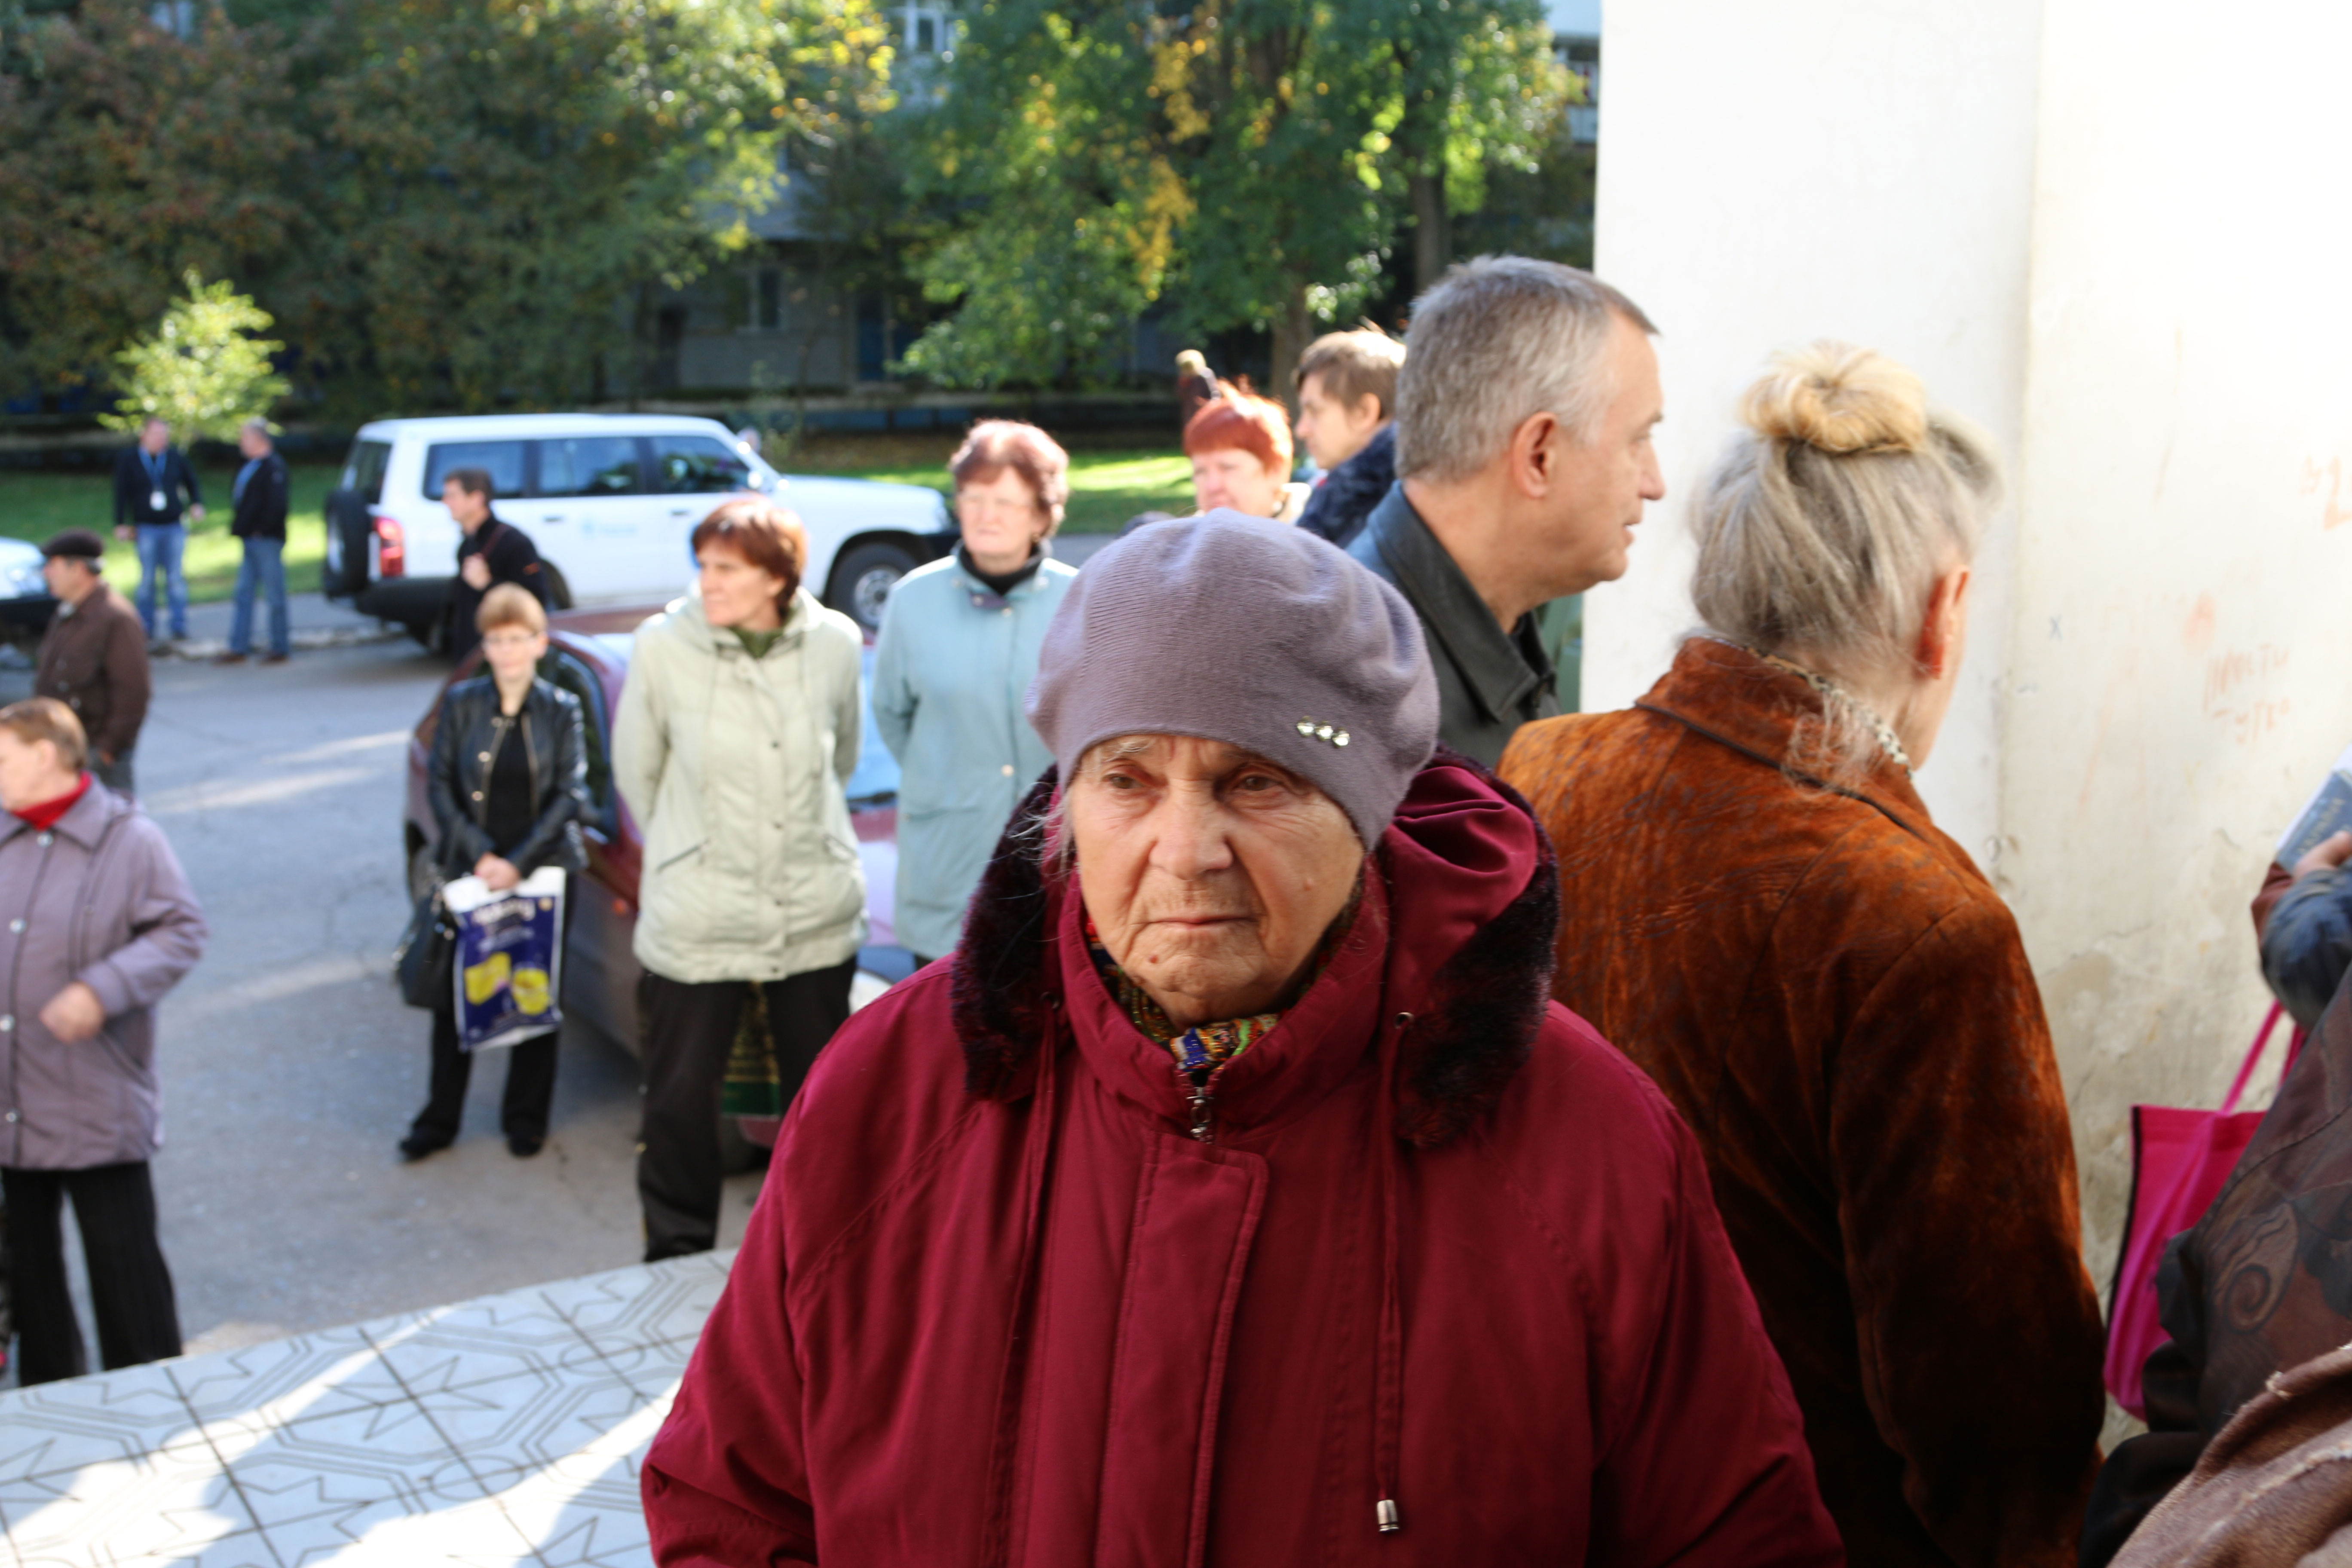 Internally displaced persons line up at a United Nations World Food Program distribution center in east Ukraine. (Photos: Nolan Peterson/The Daily Signal)